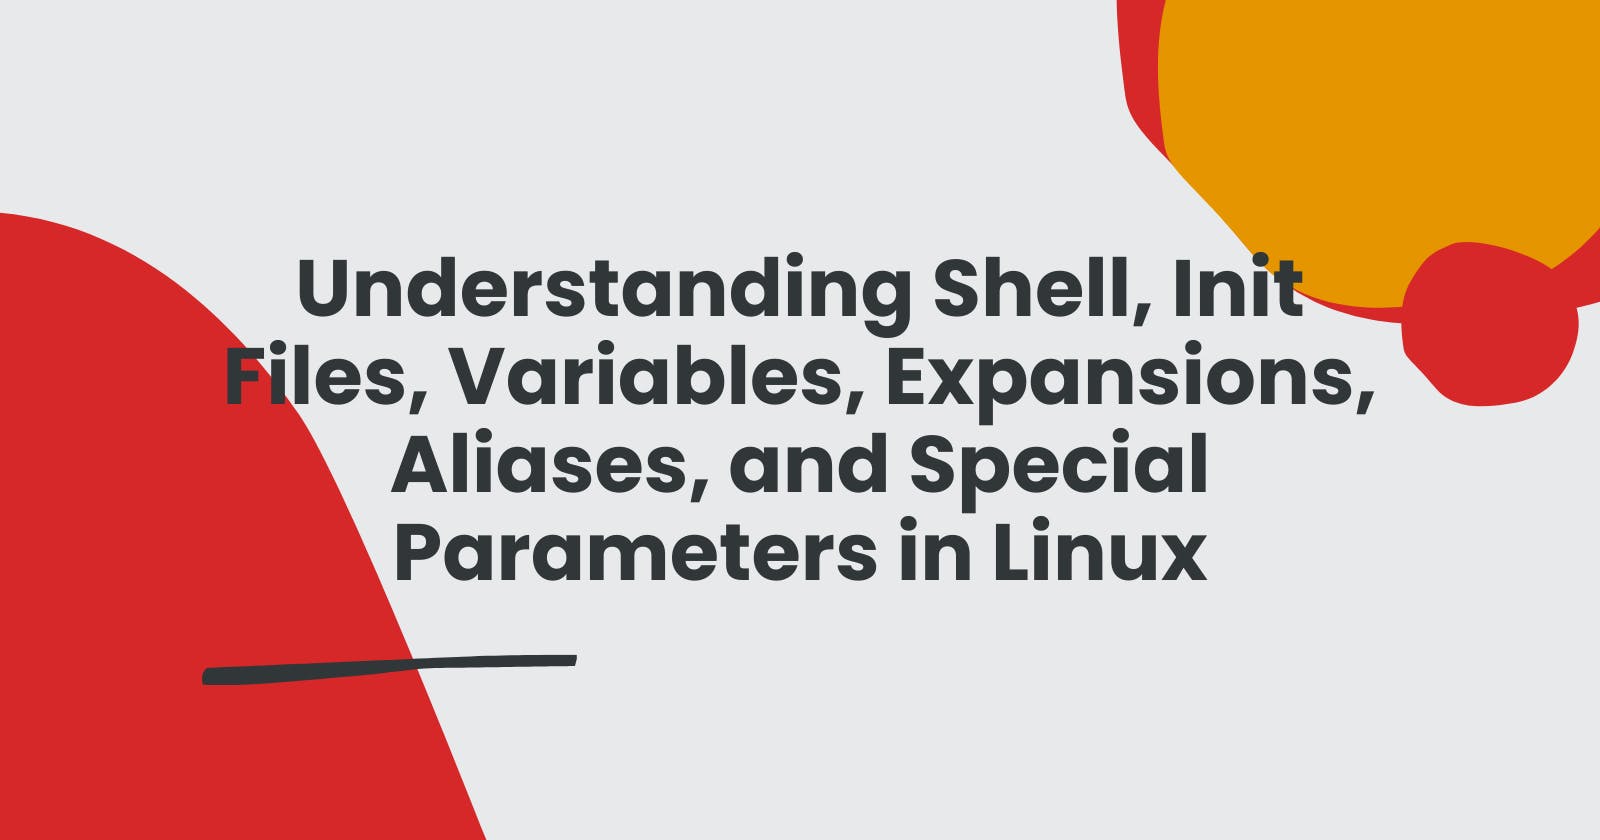 Understanding Shell, Init Files, Variables, Expansions, Aliases, and Special Parameters in Linux